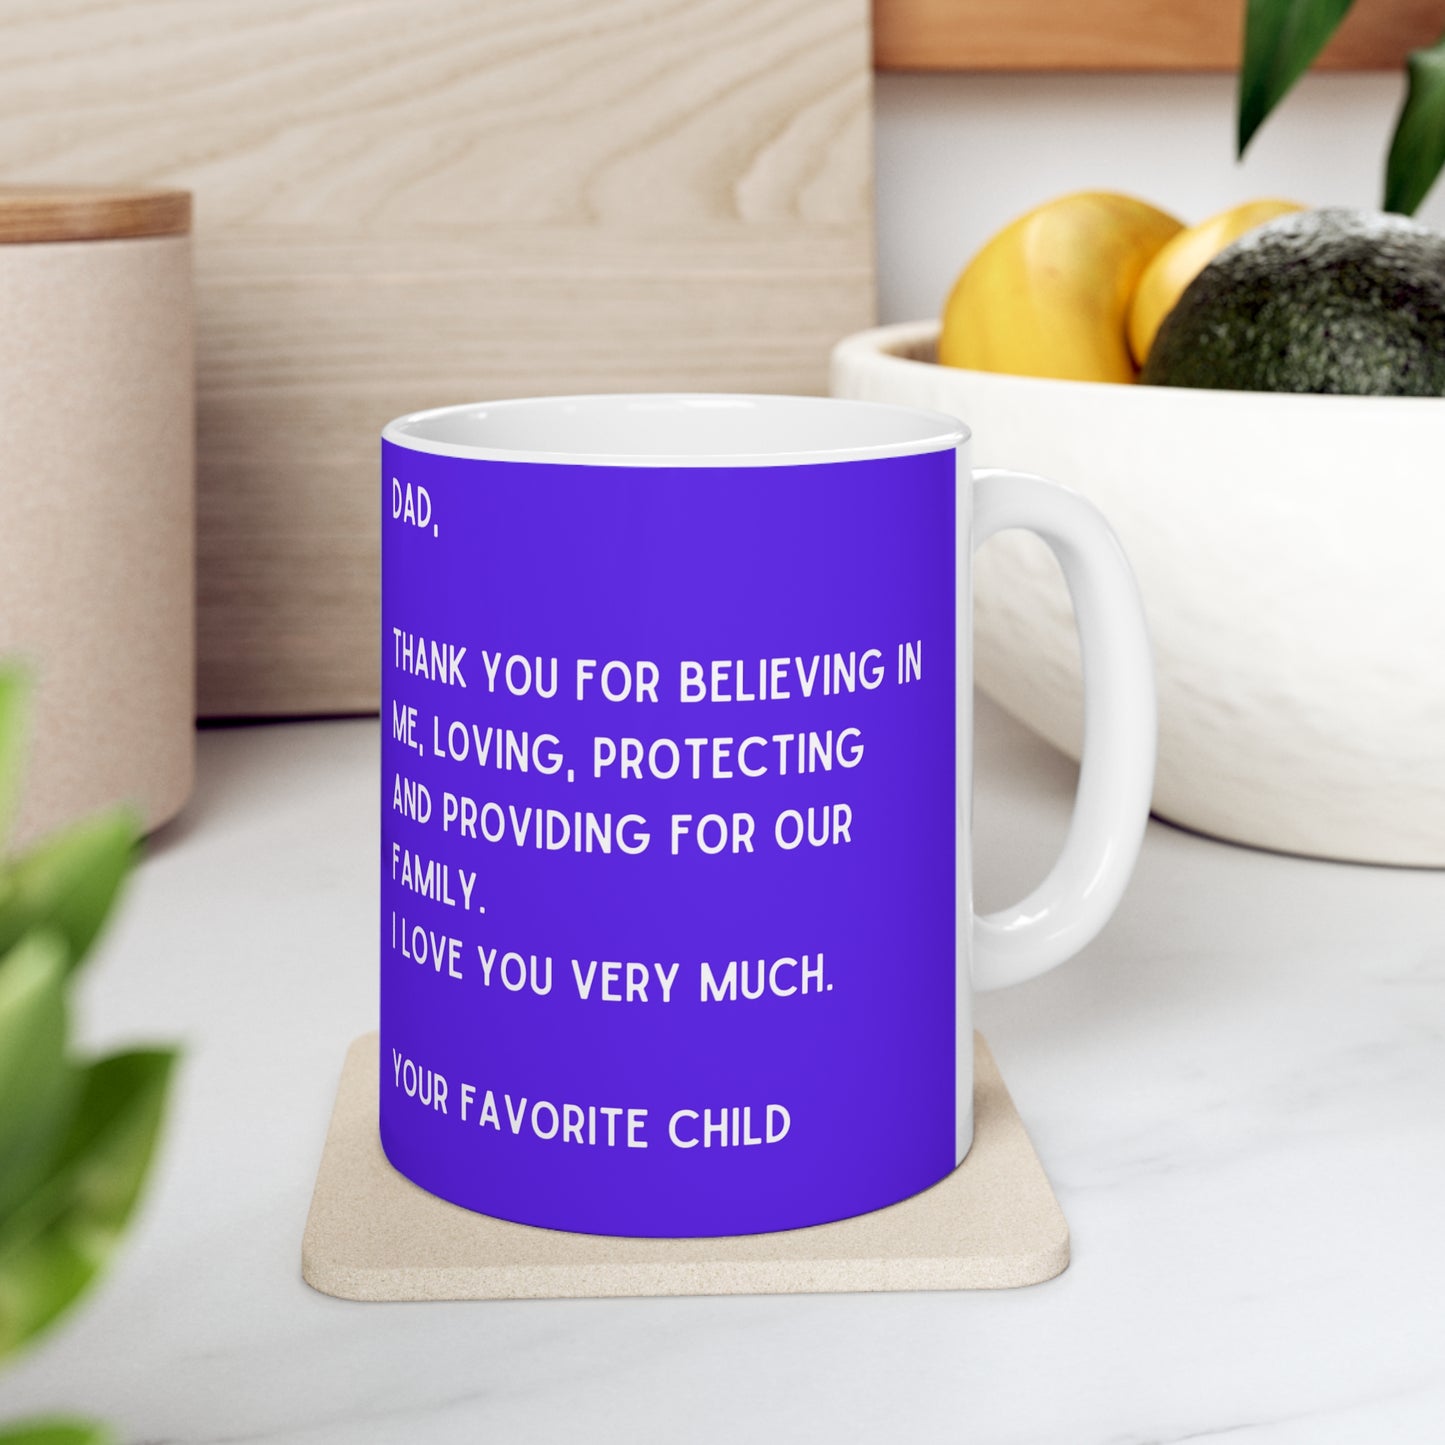 A heartfelt message of love and appreciation coffee mug for that special dad. This will soon be his favorite mug.